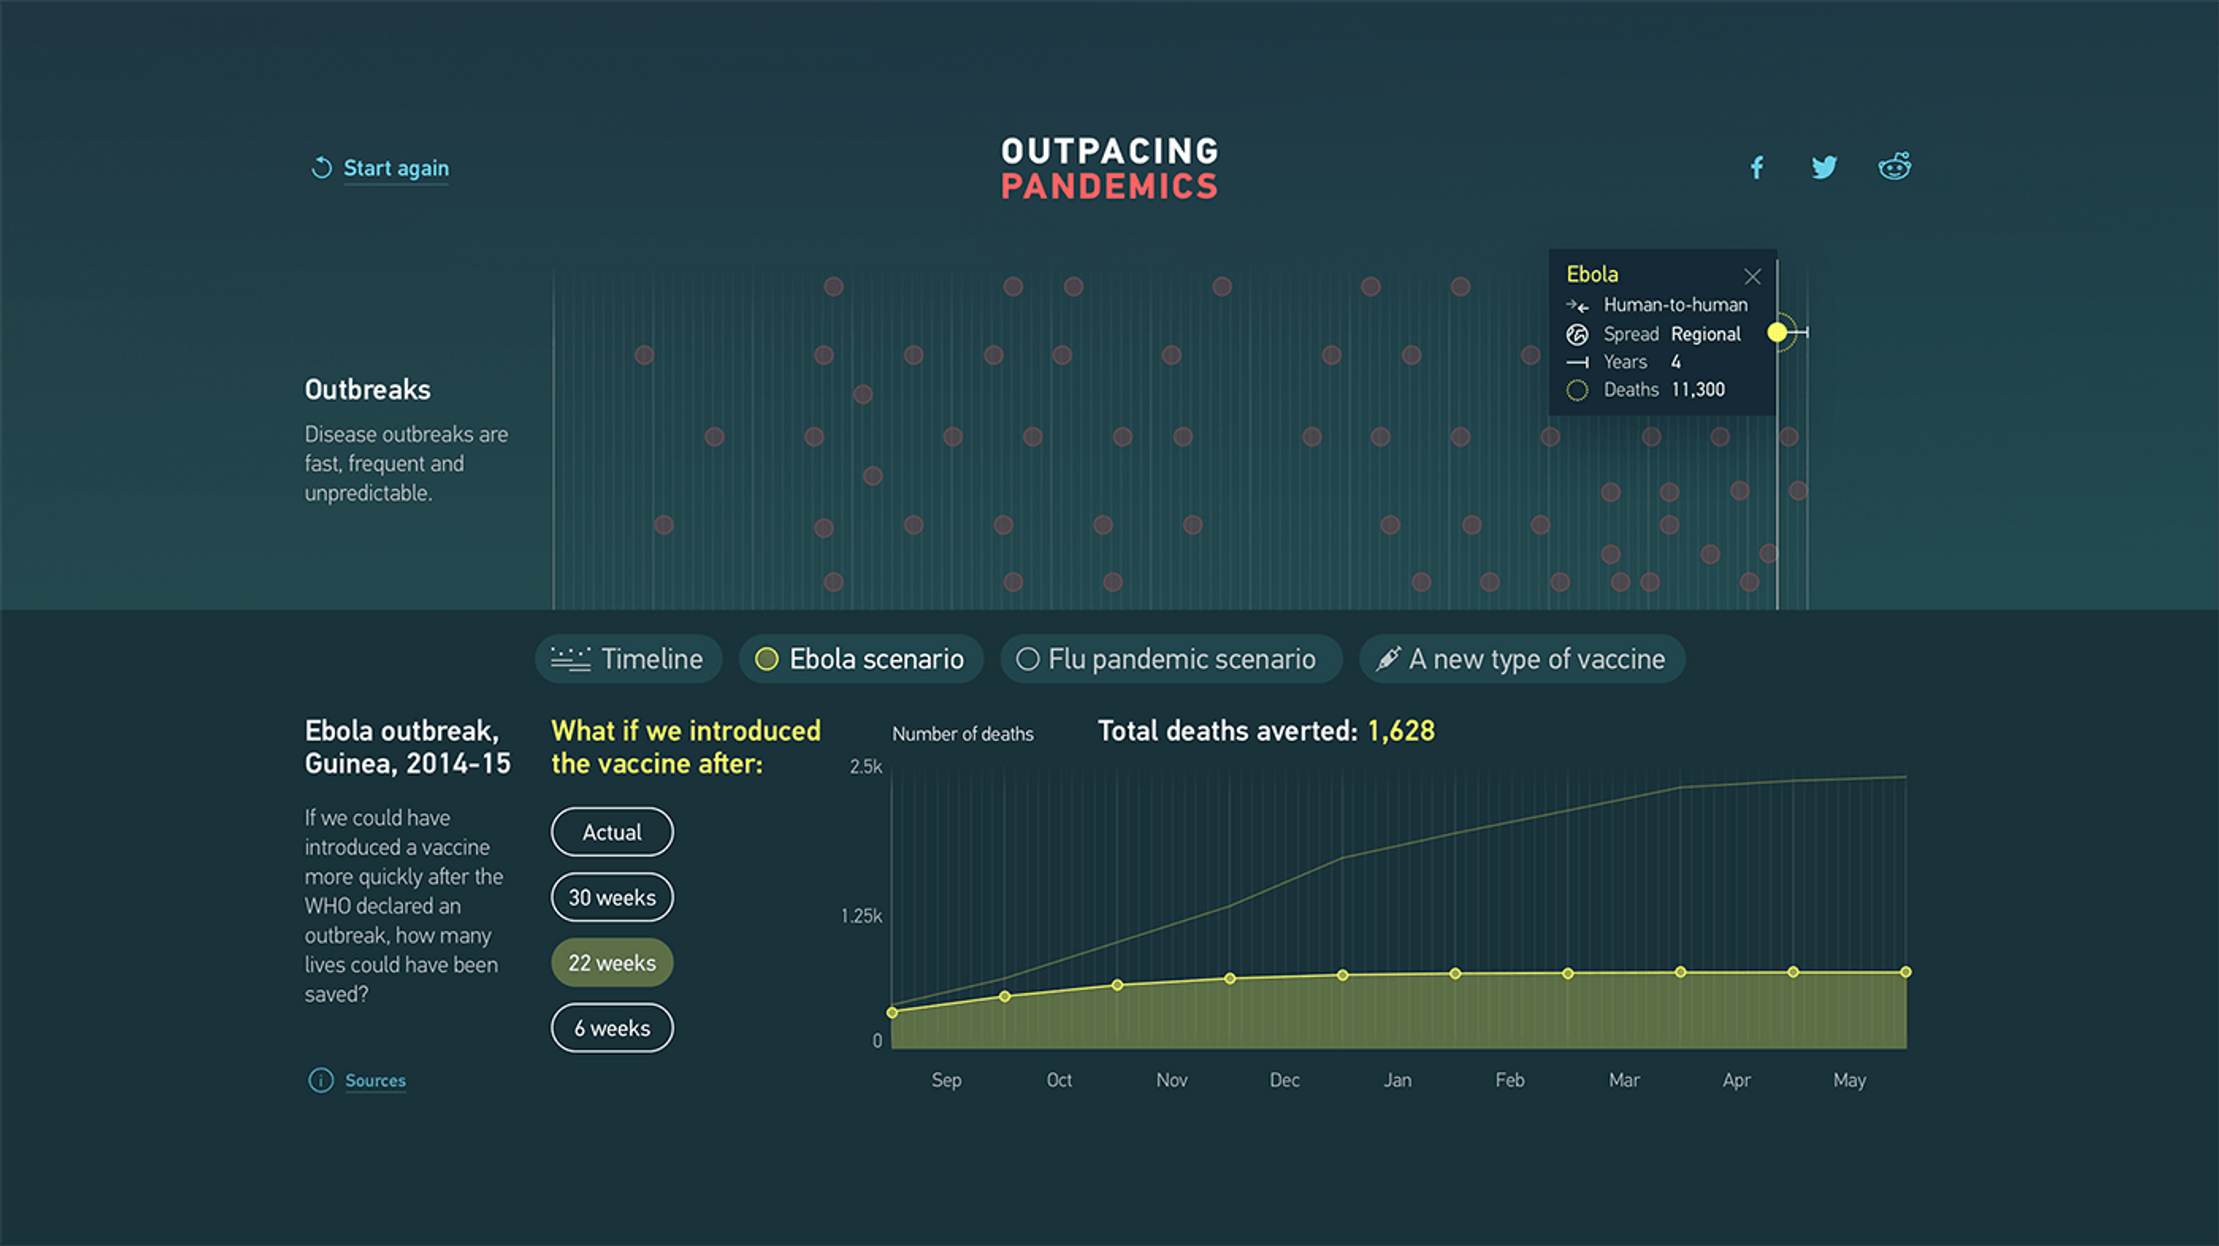 A visualization of deaths from an ebola outbreak scenario in Guinea in 2014-15. Interactive buttons let users compare the actual number of deaths to scenarios where the vaccine was introduced sooner and counter shows the number of deaths this would avert. 